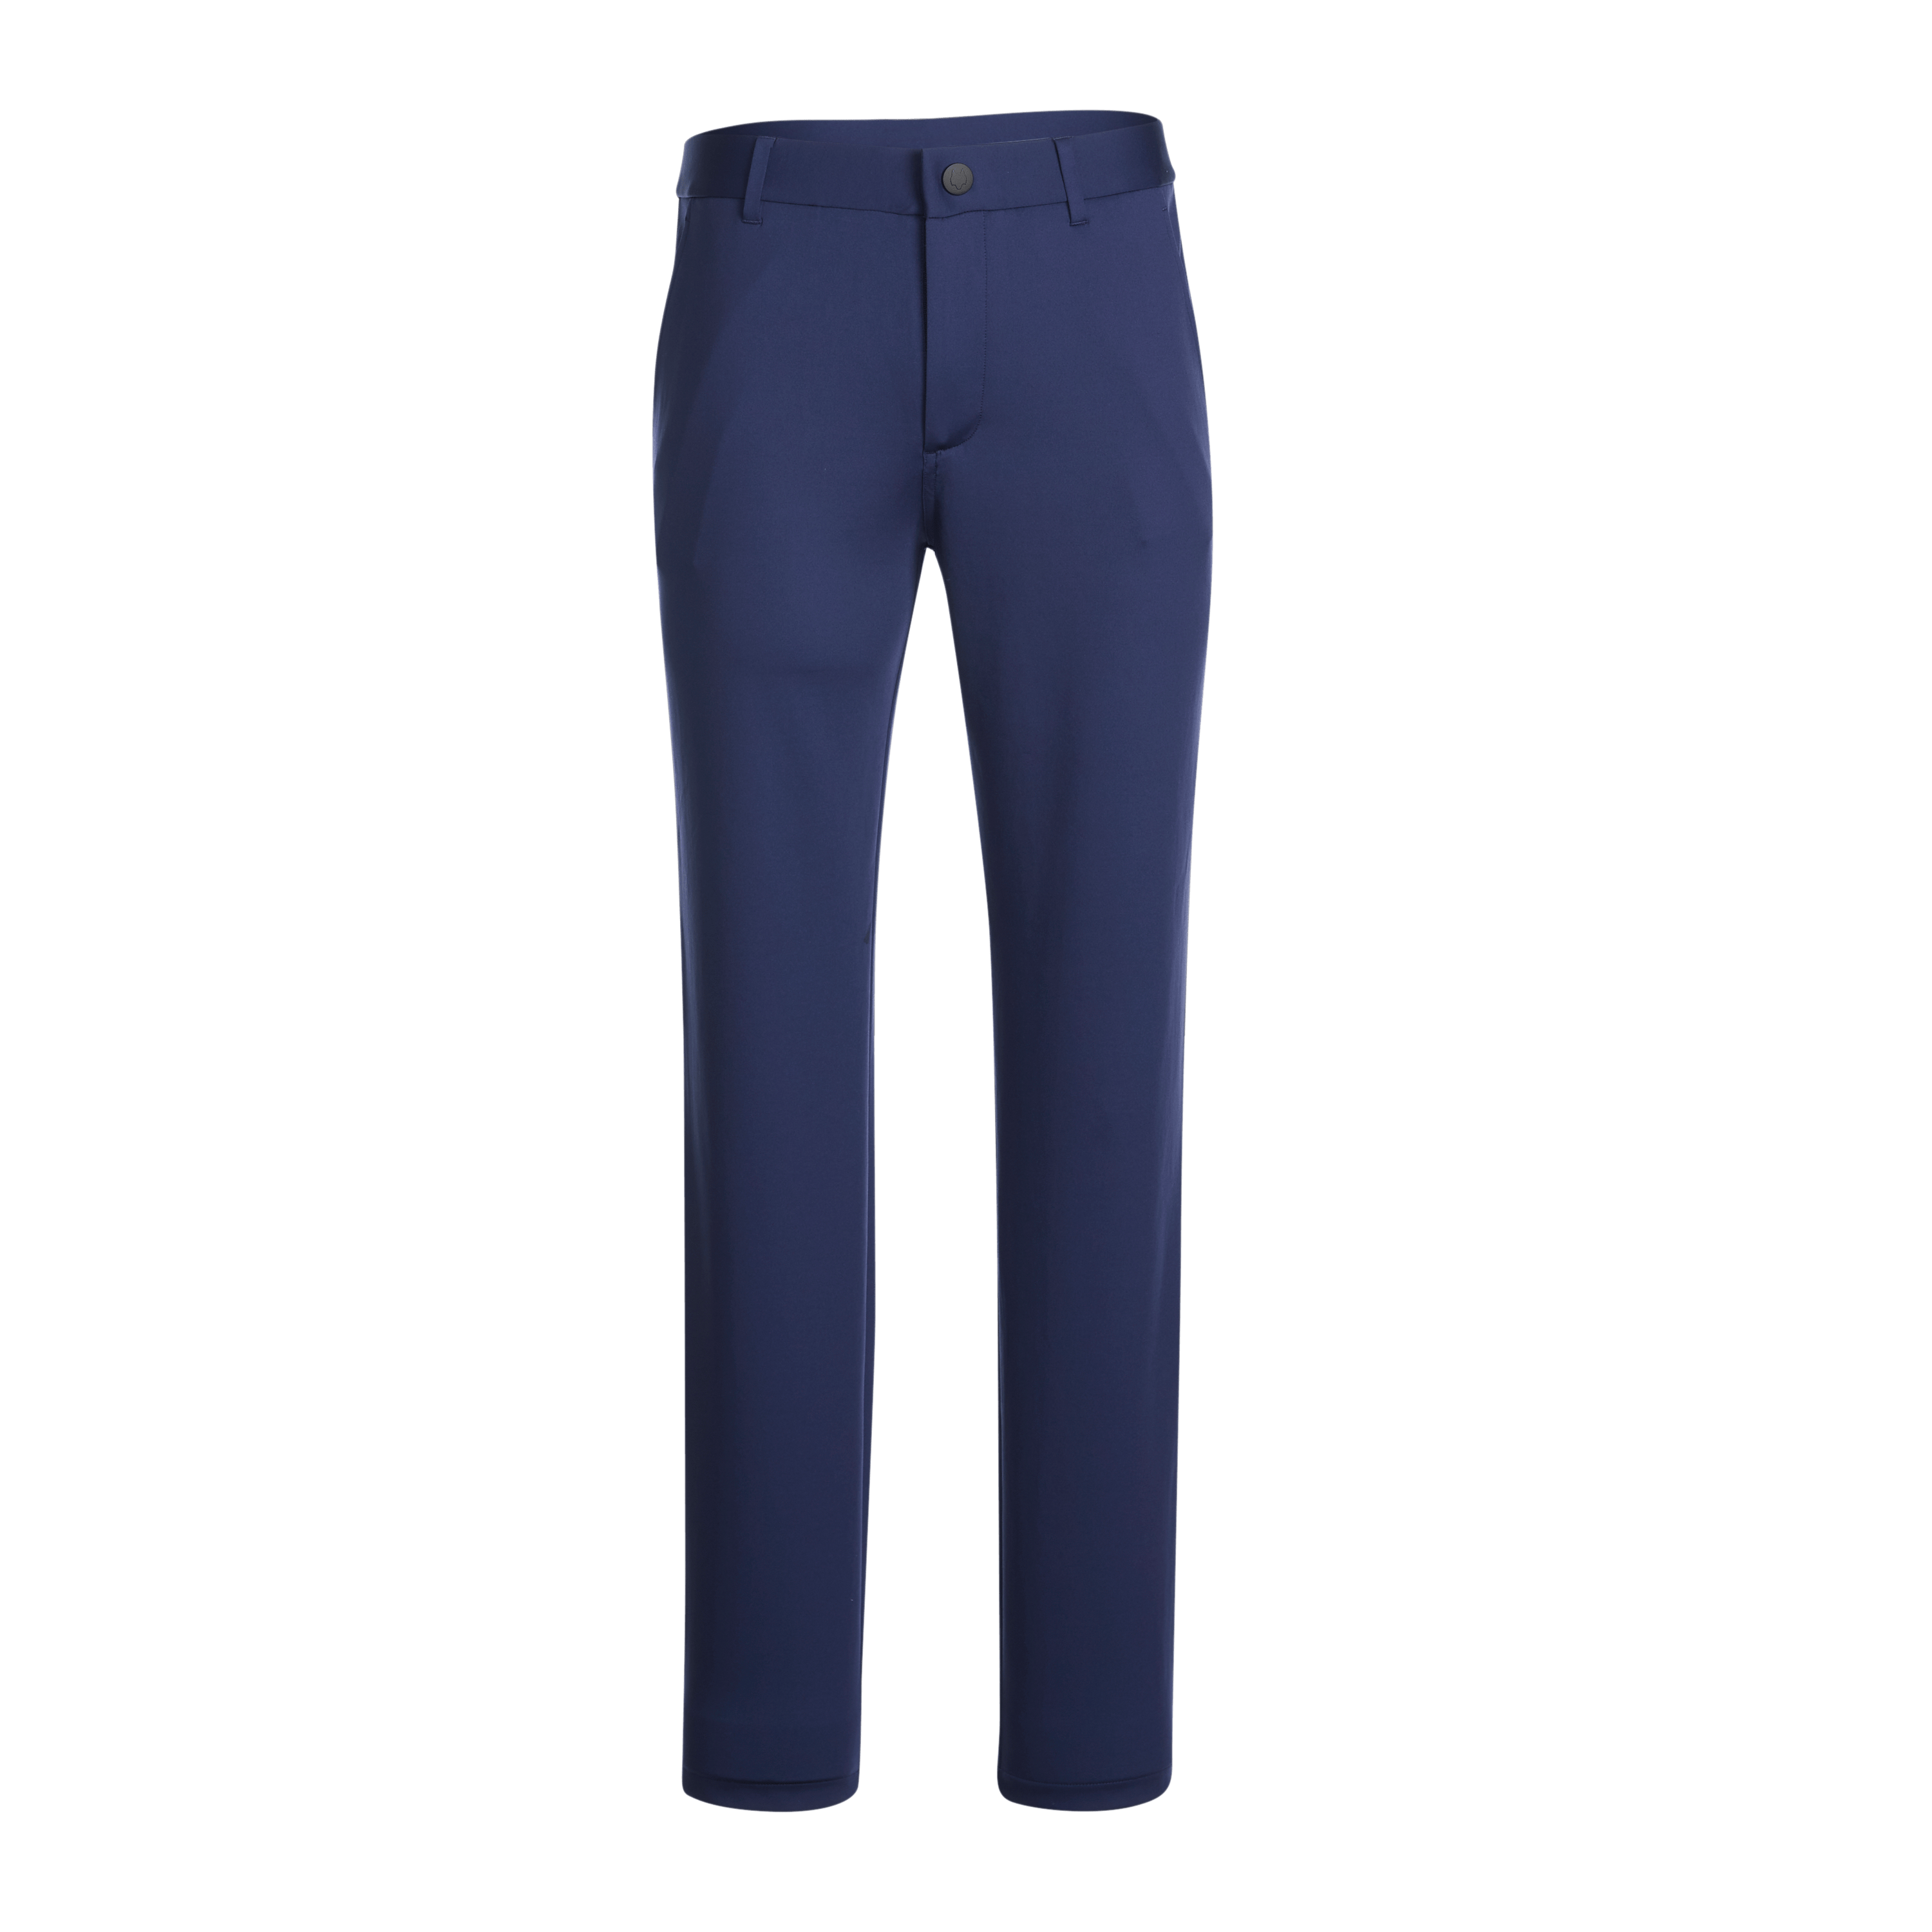 Mens Comfy White Trousers with Elastic Waist & Zip Pocket - JLifestyle Store